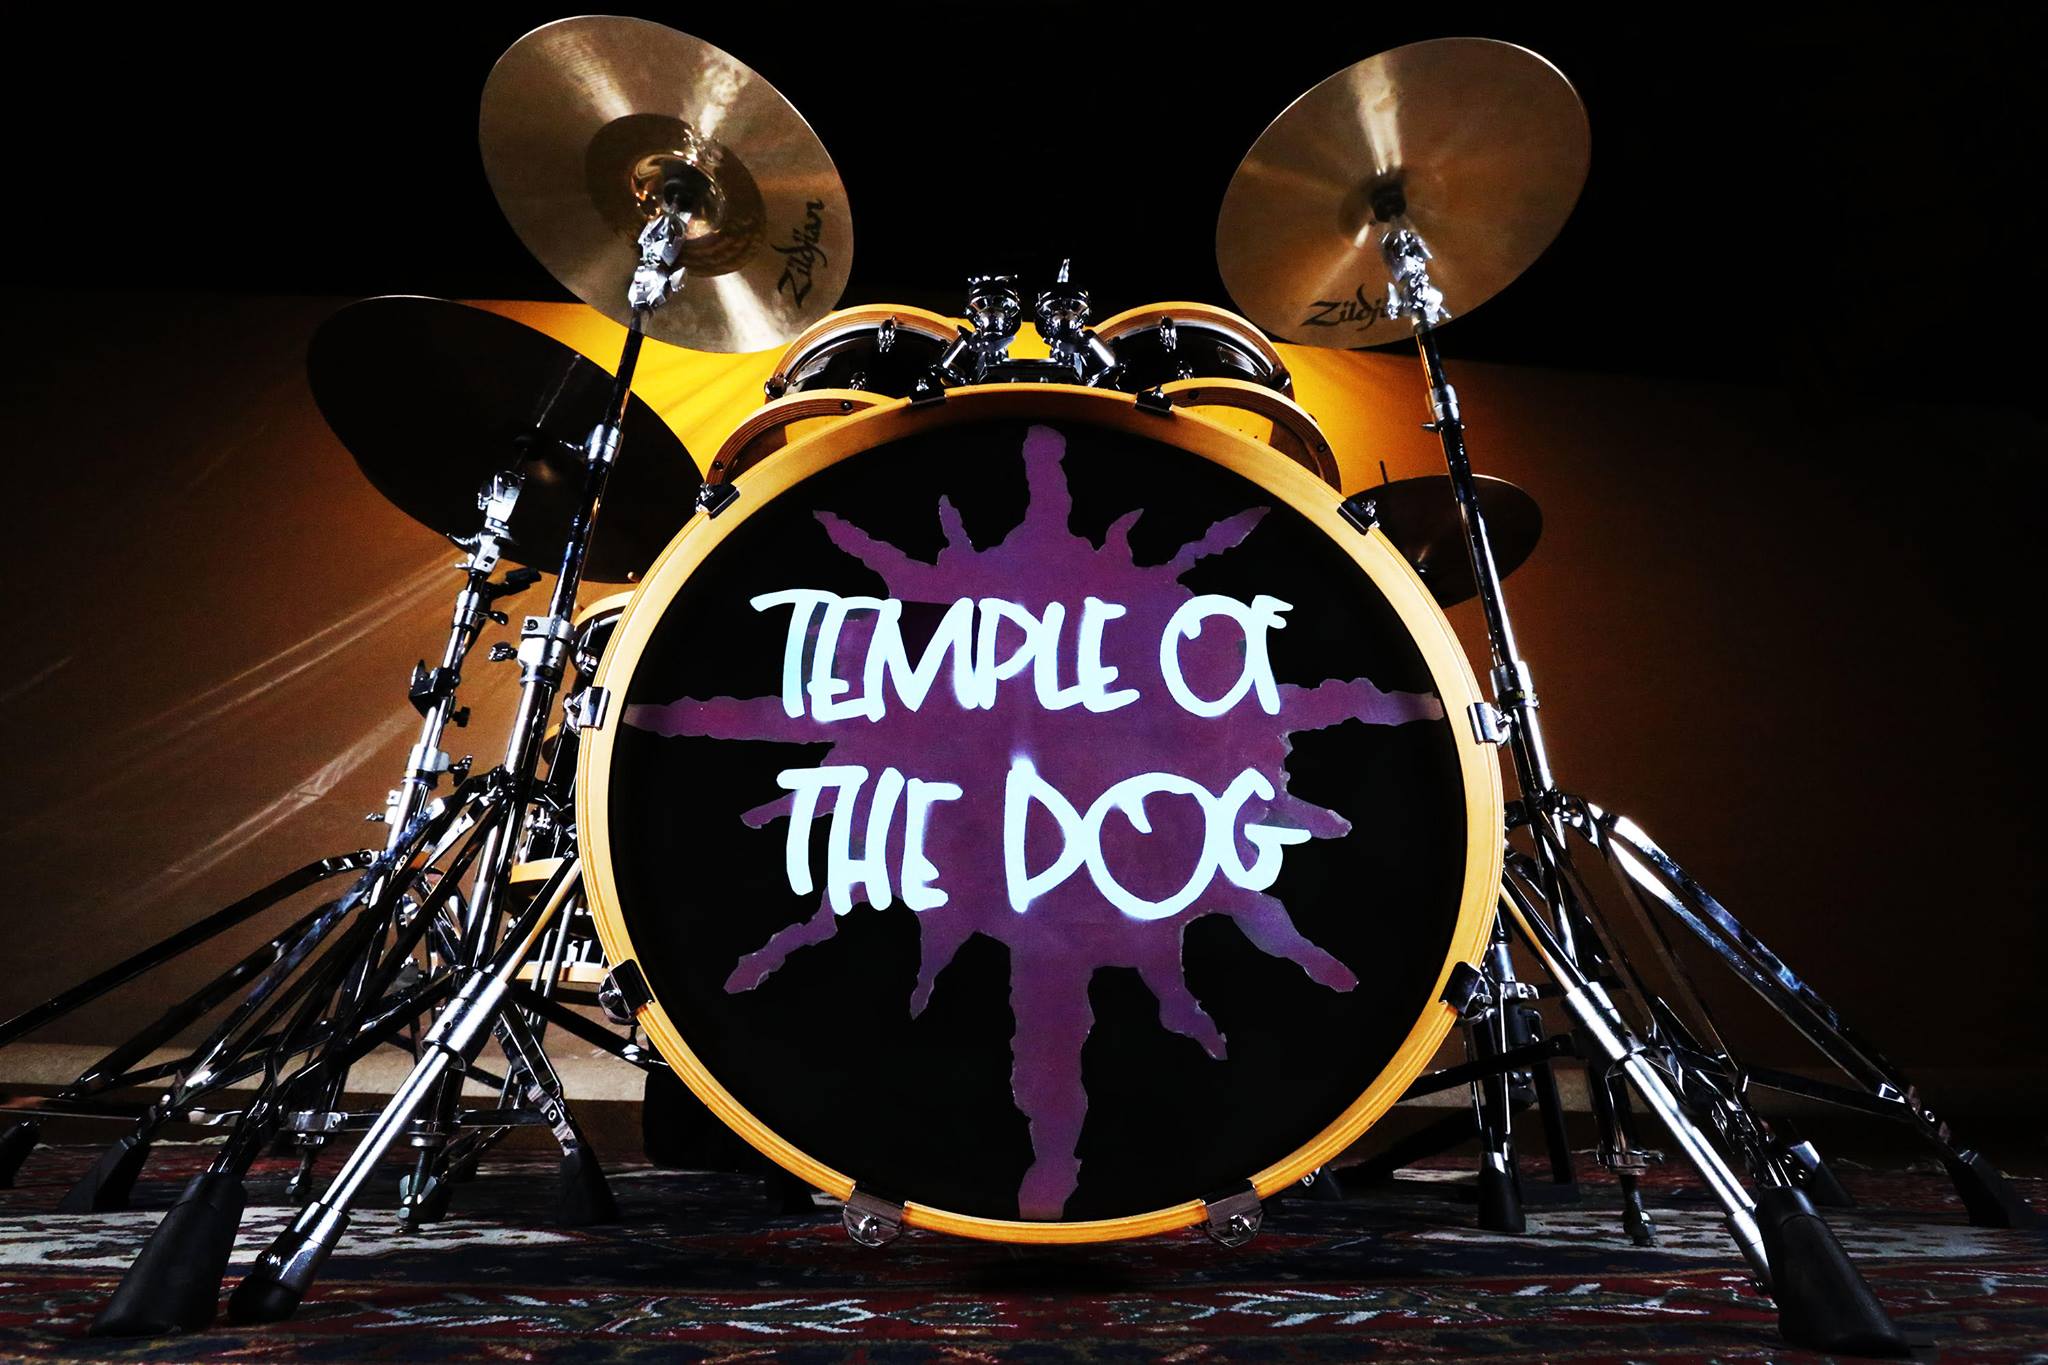 Temple of the Dog Announce First Ever Tour